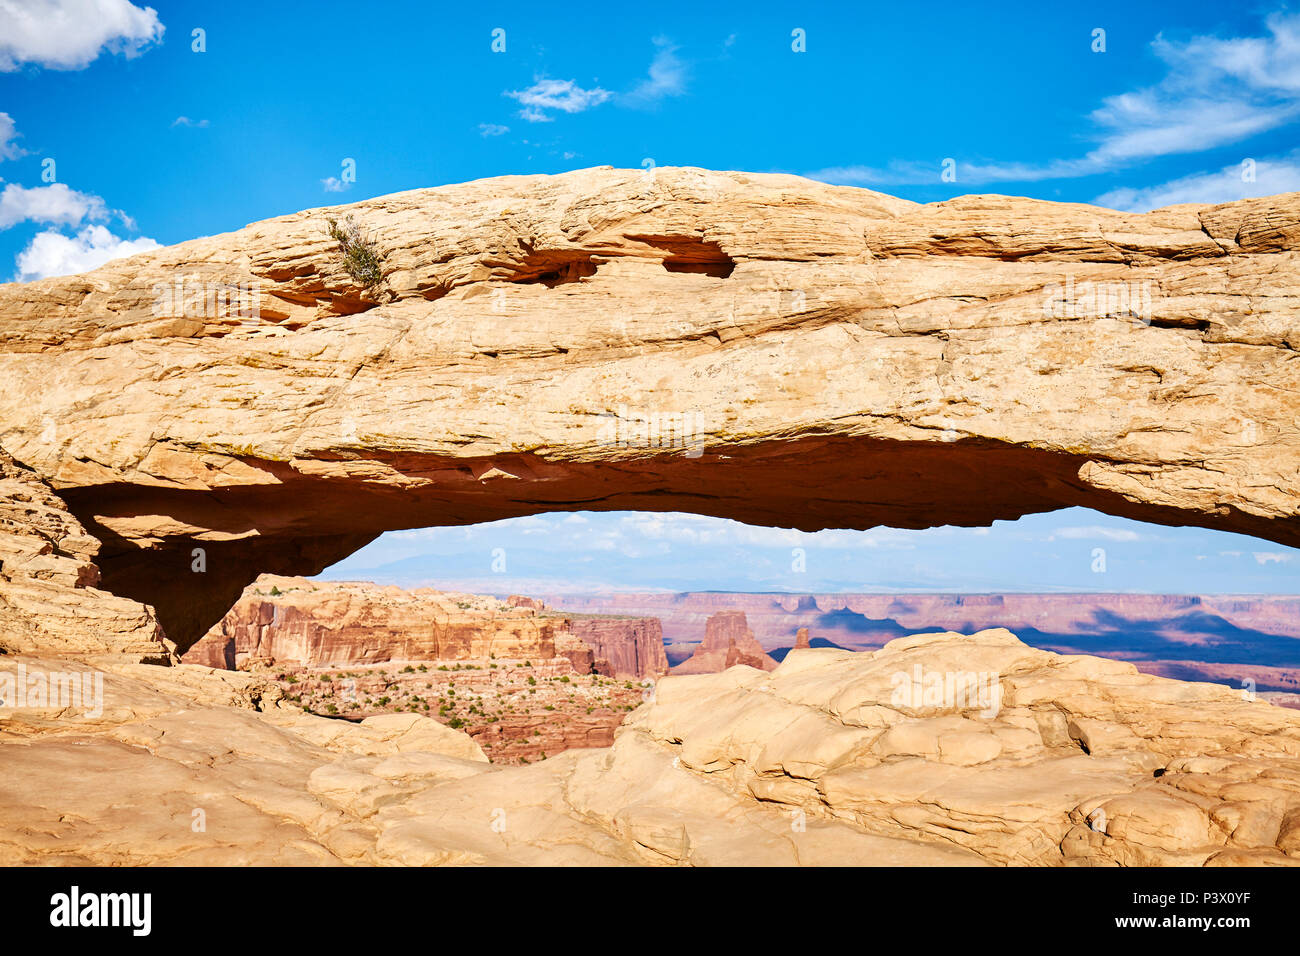 Mesa Arch in the Canyonlands National Park, Utah, USA. Stock Photo